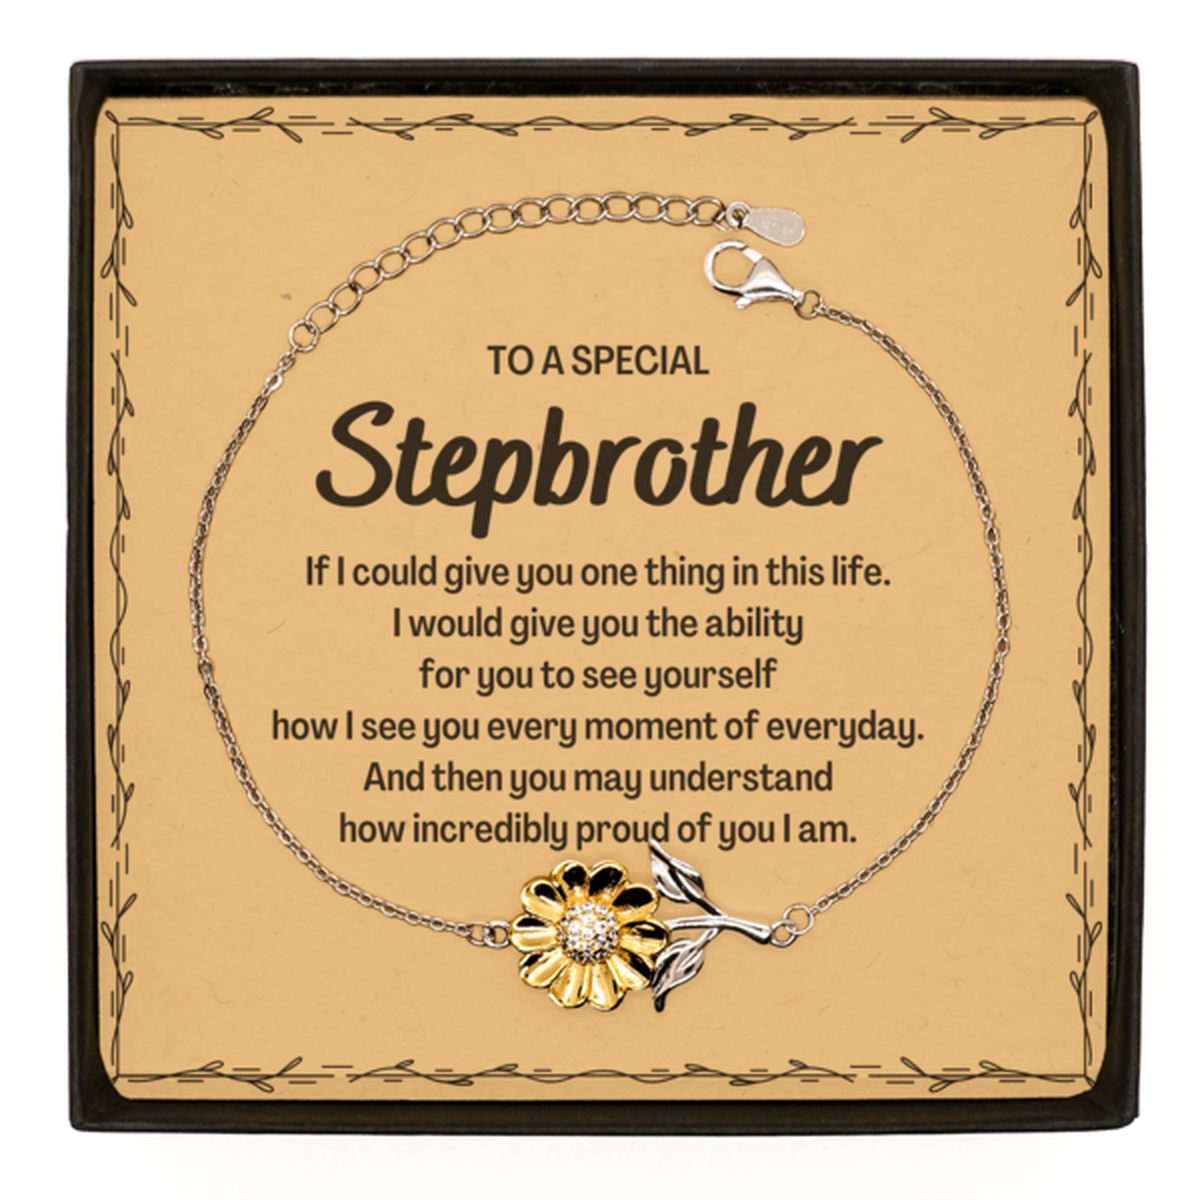 To My Stepbrother Sunflower Bracelet, Gifts For Stepbrother Message Card, Inspirational Gifts for Christmas Birthday, Epic Gifts for Stepbrother To A Special Stepbrother how incredibly proud of you I am